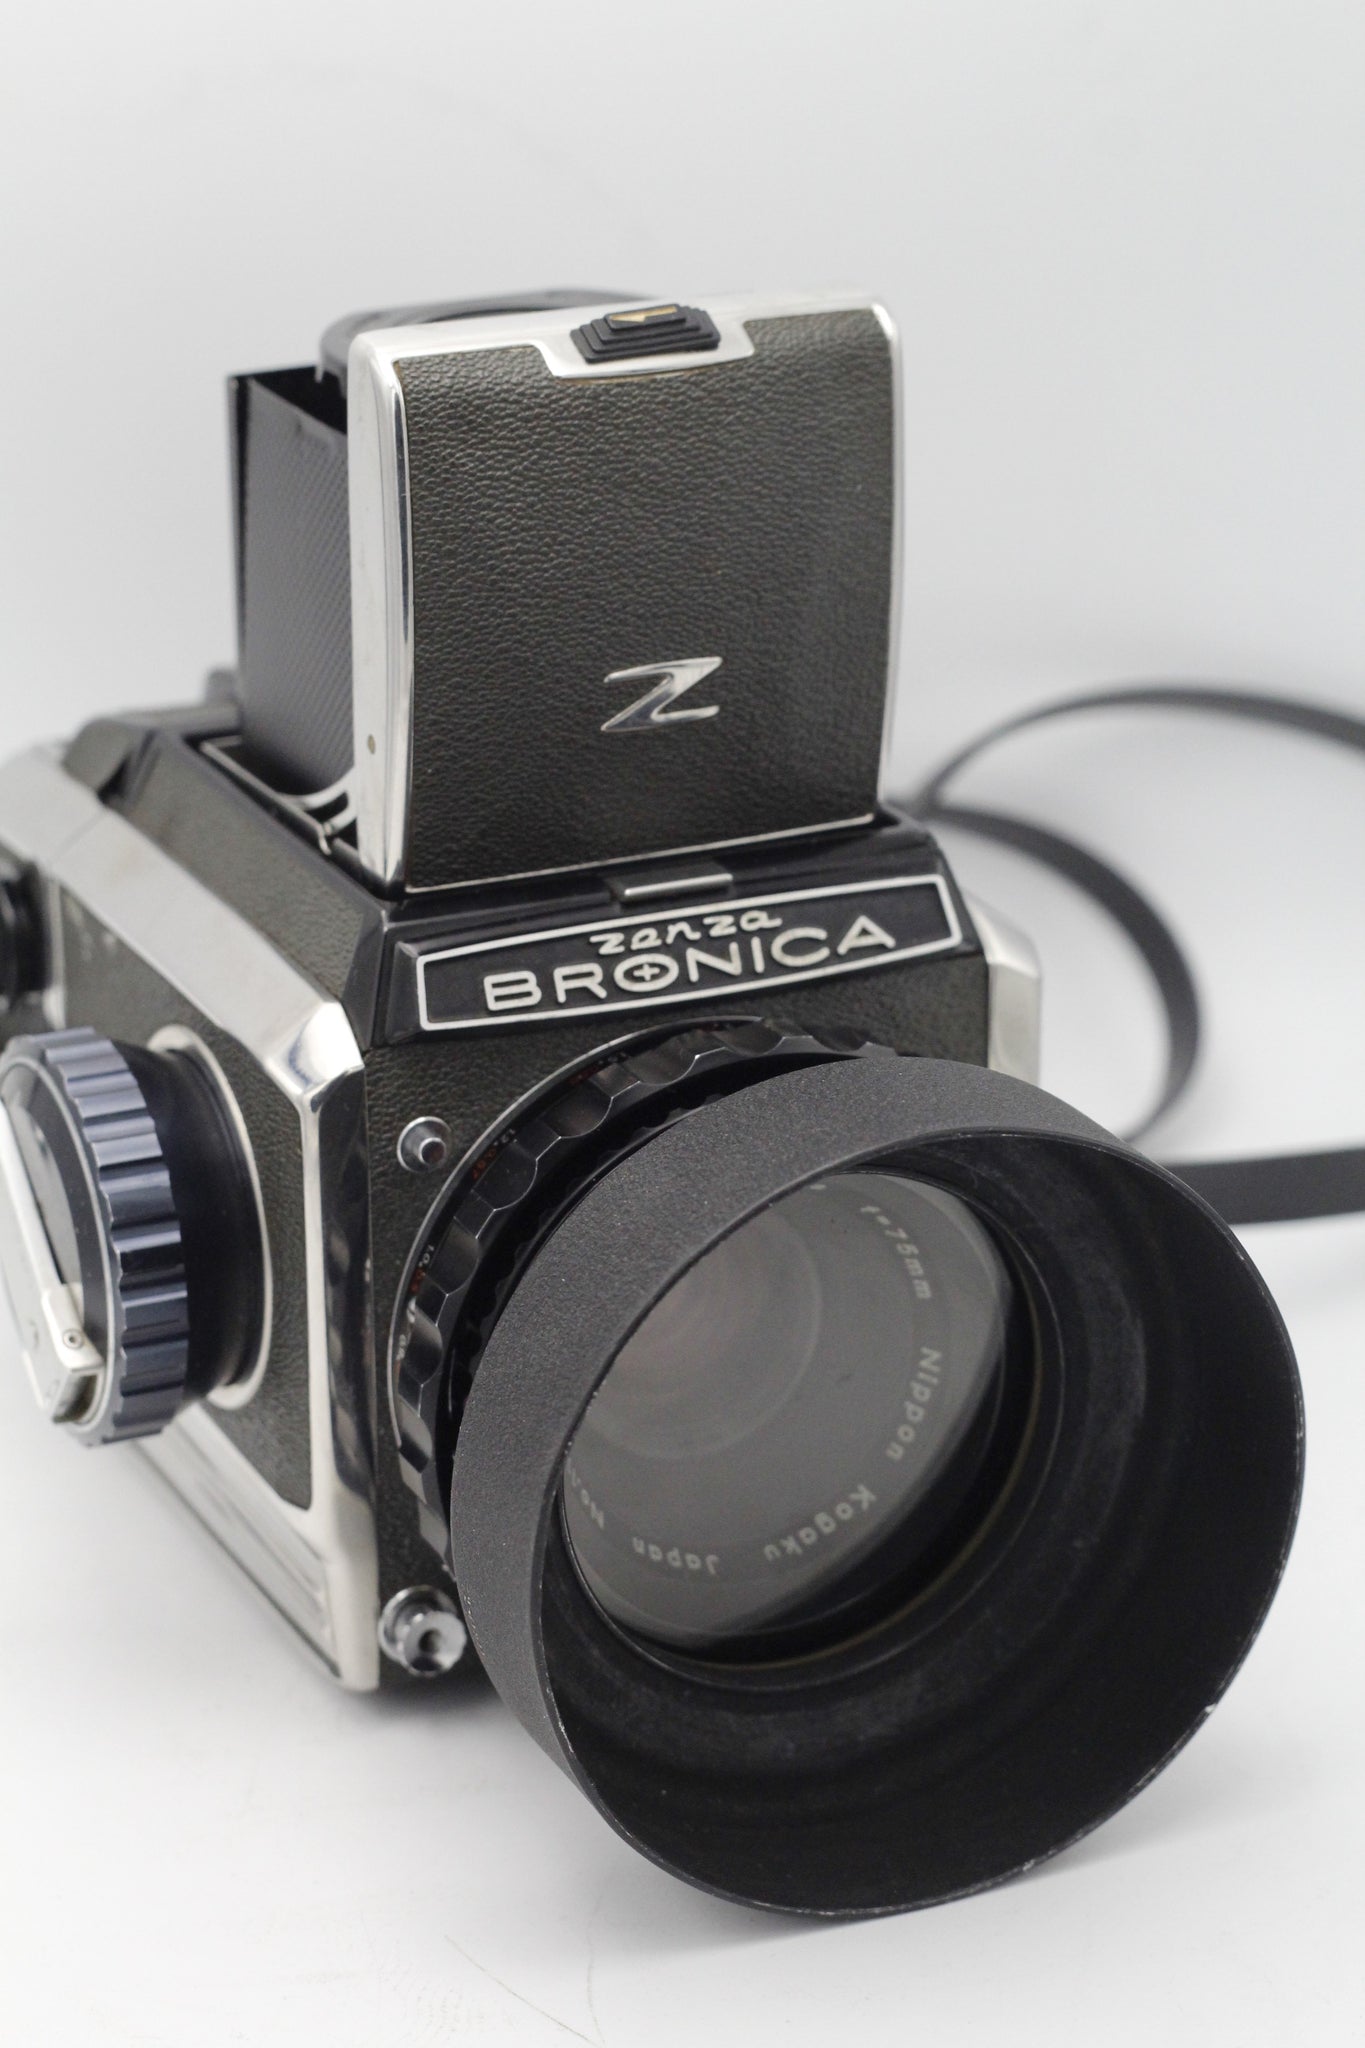 Used Bronica Zenza S2 with 120 film back and Nikkor-P 75mm f/2.8